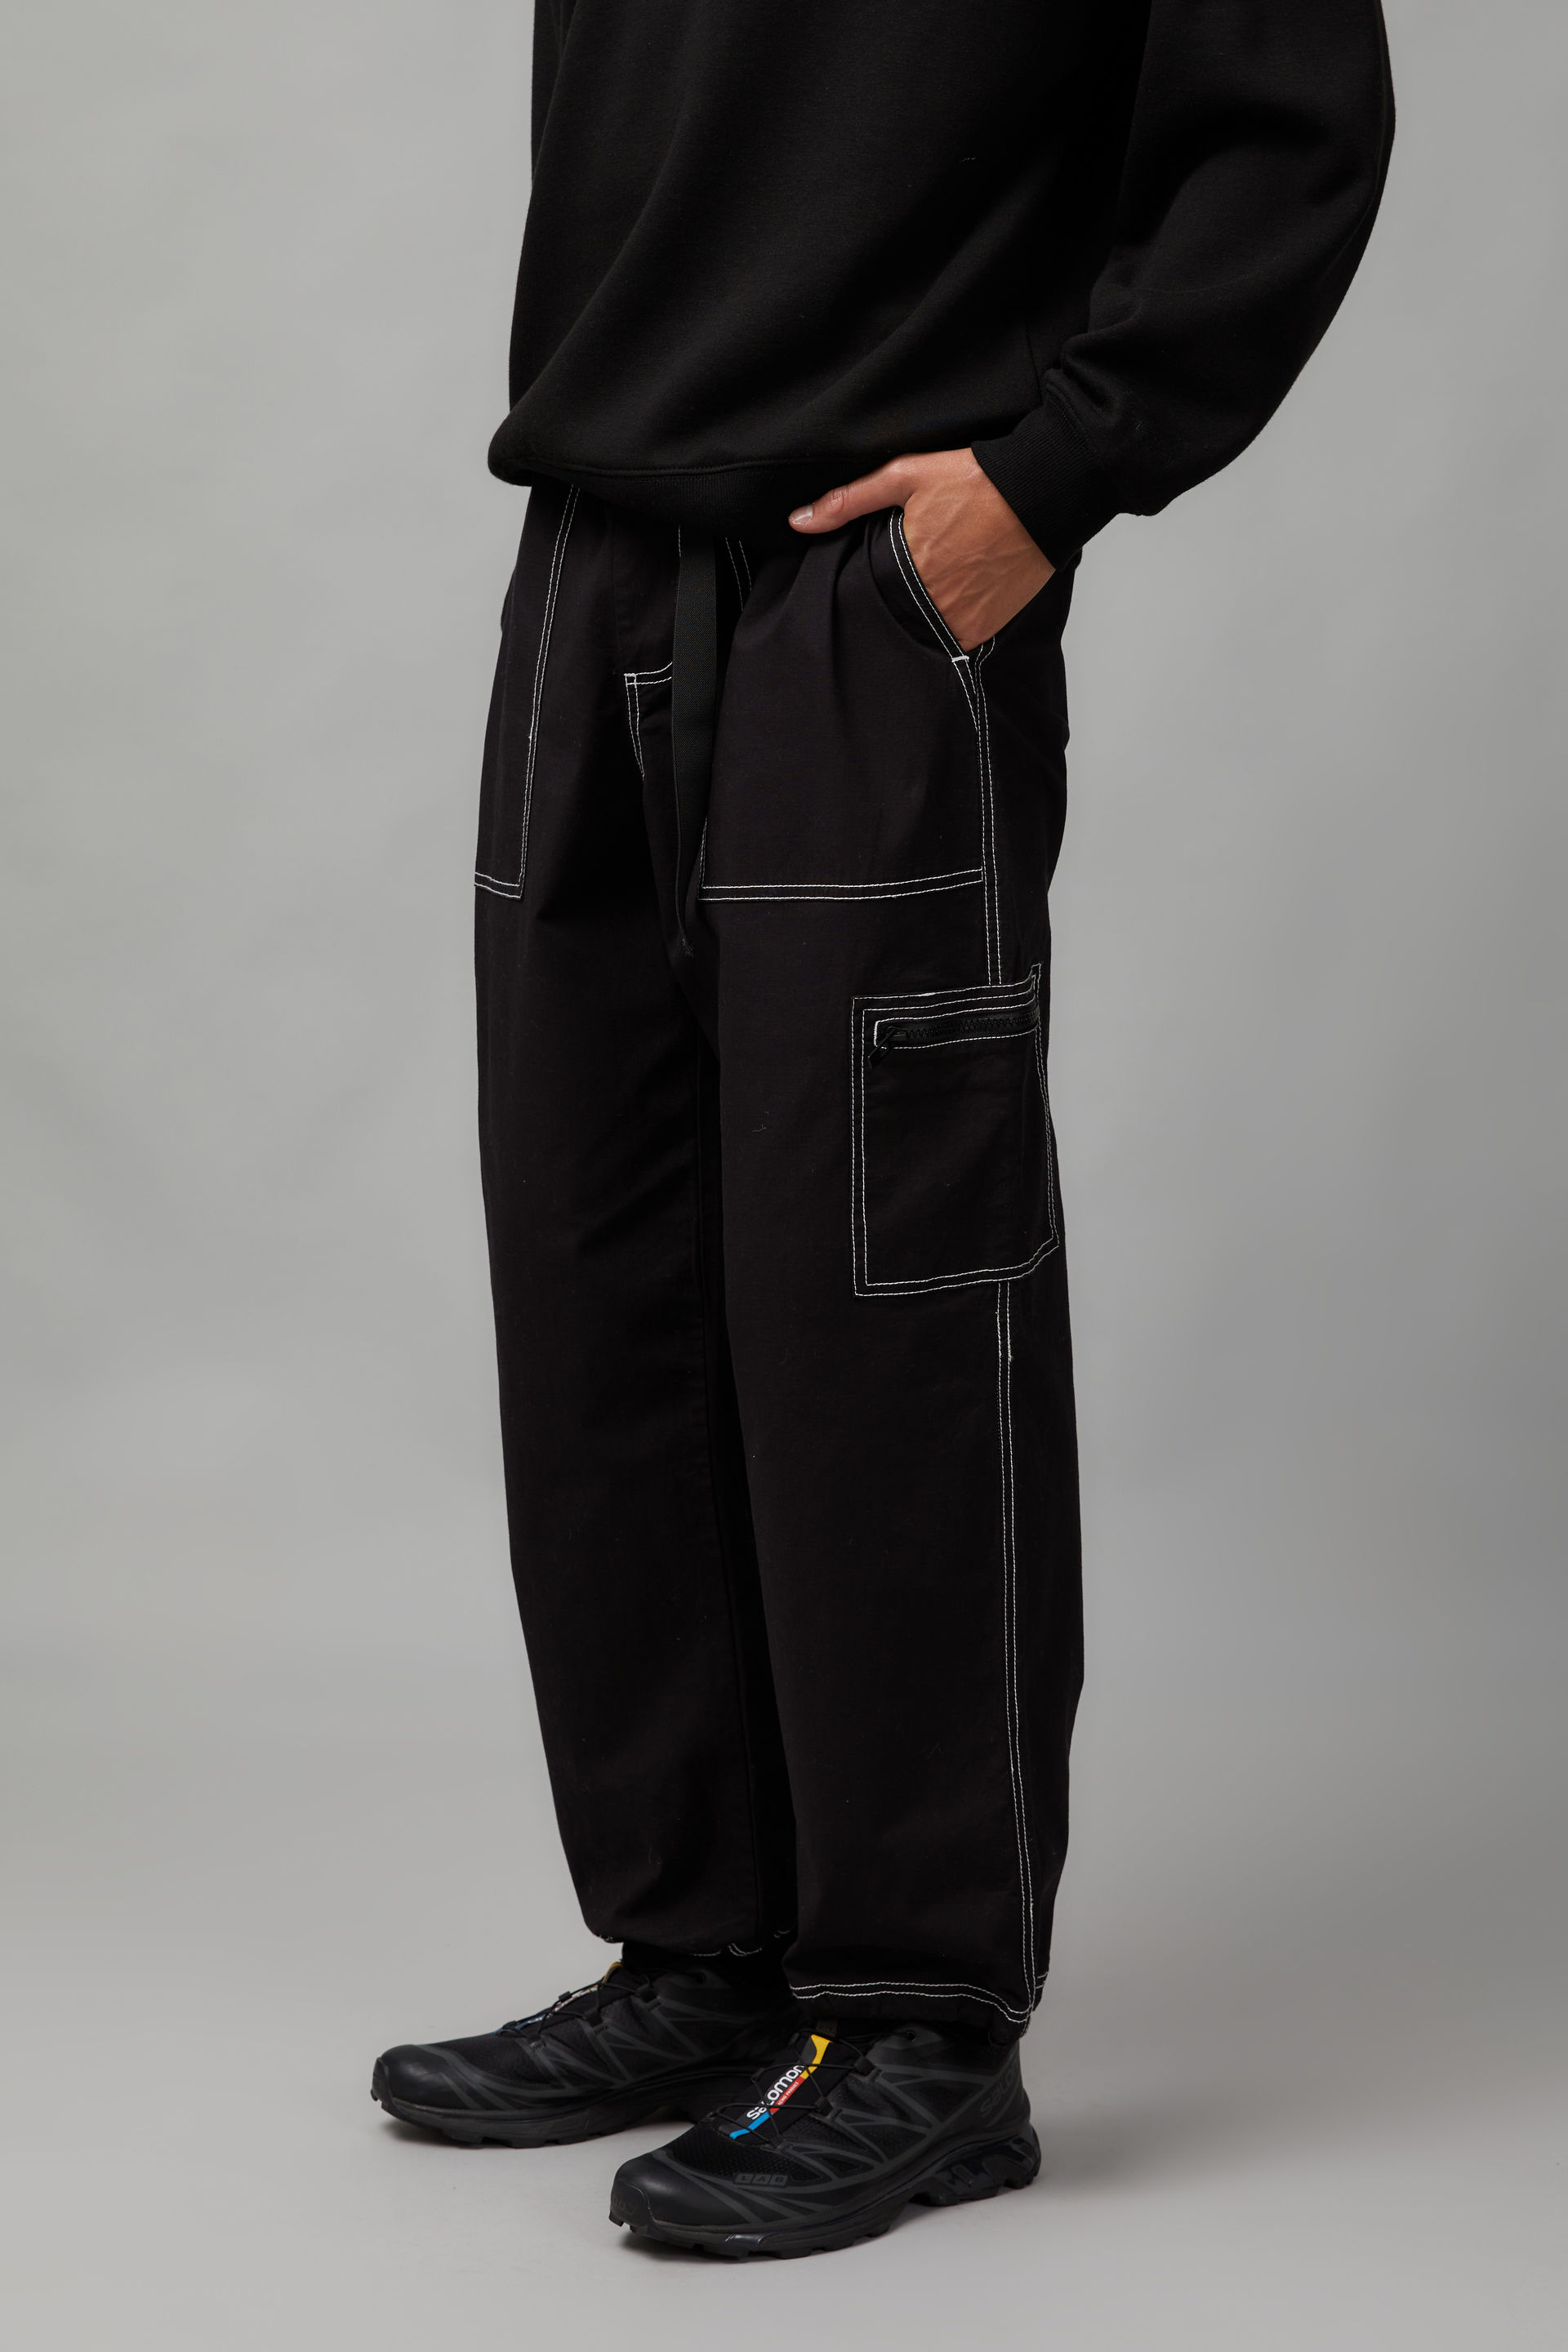 Half Half Relaxed Utility Pant